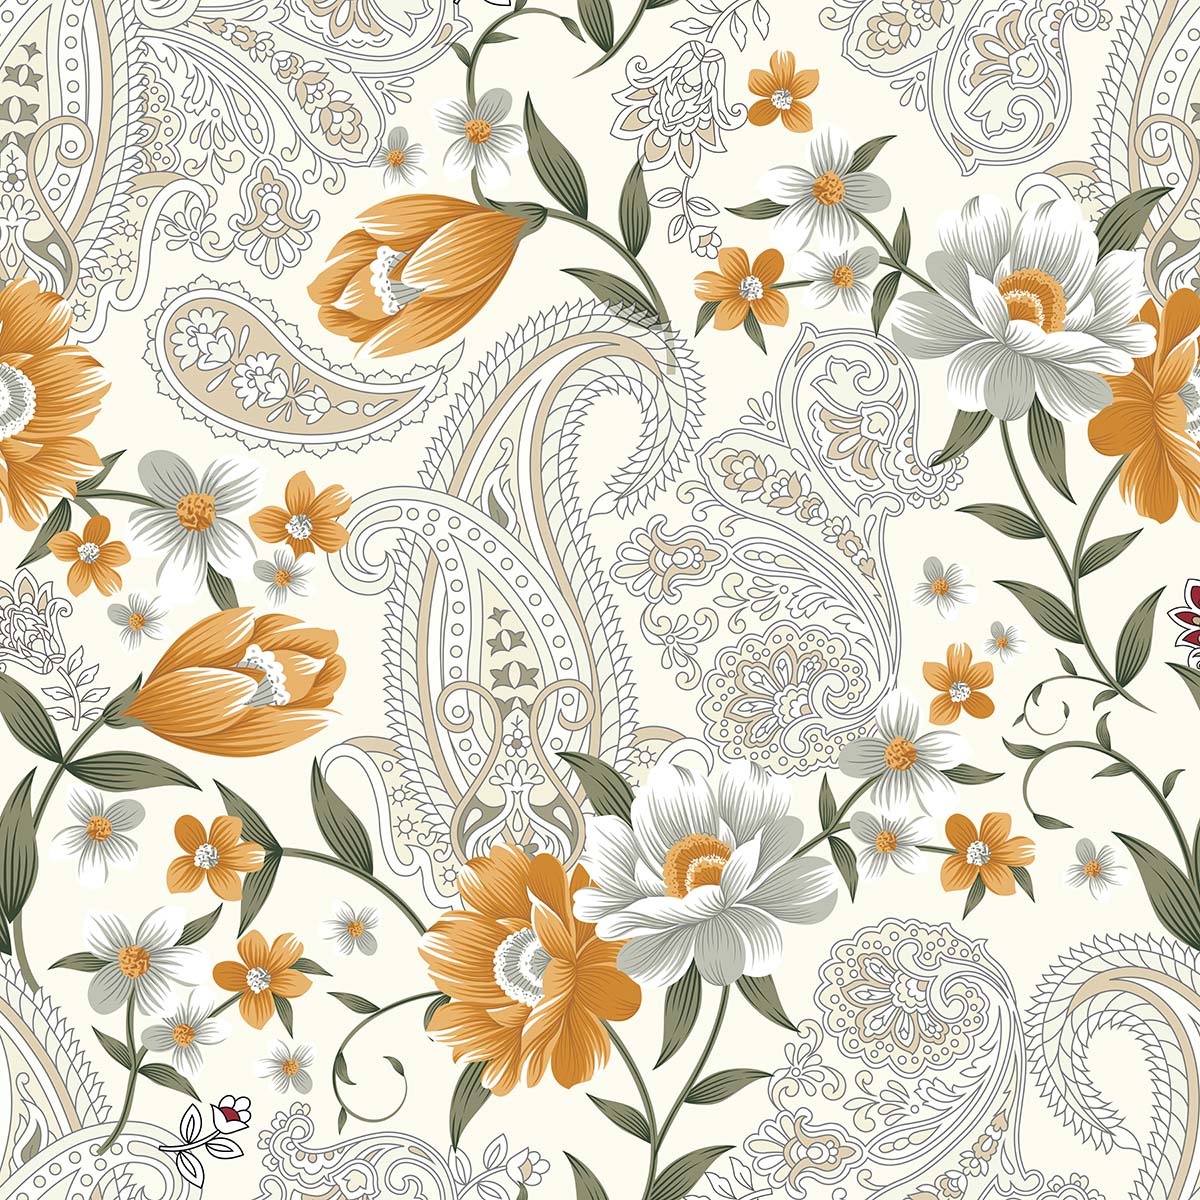 A pattern of flowers and paisley